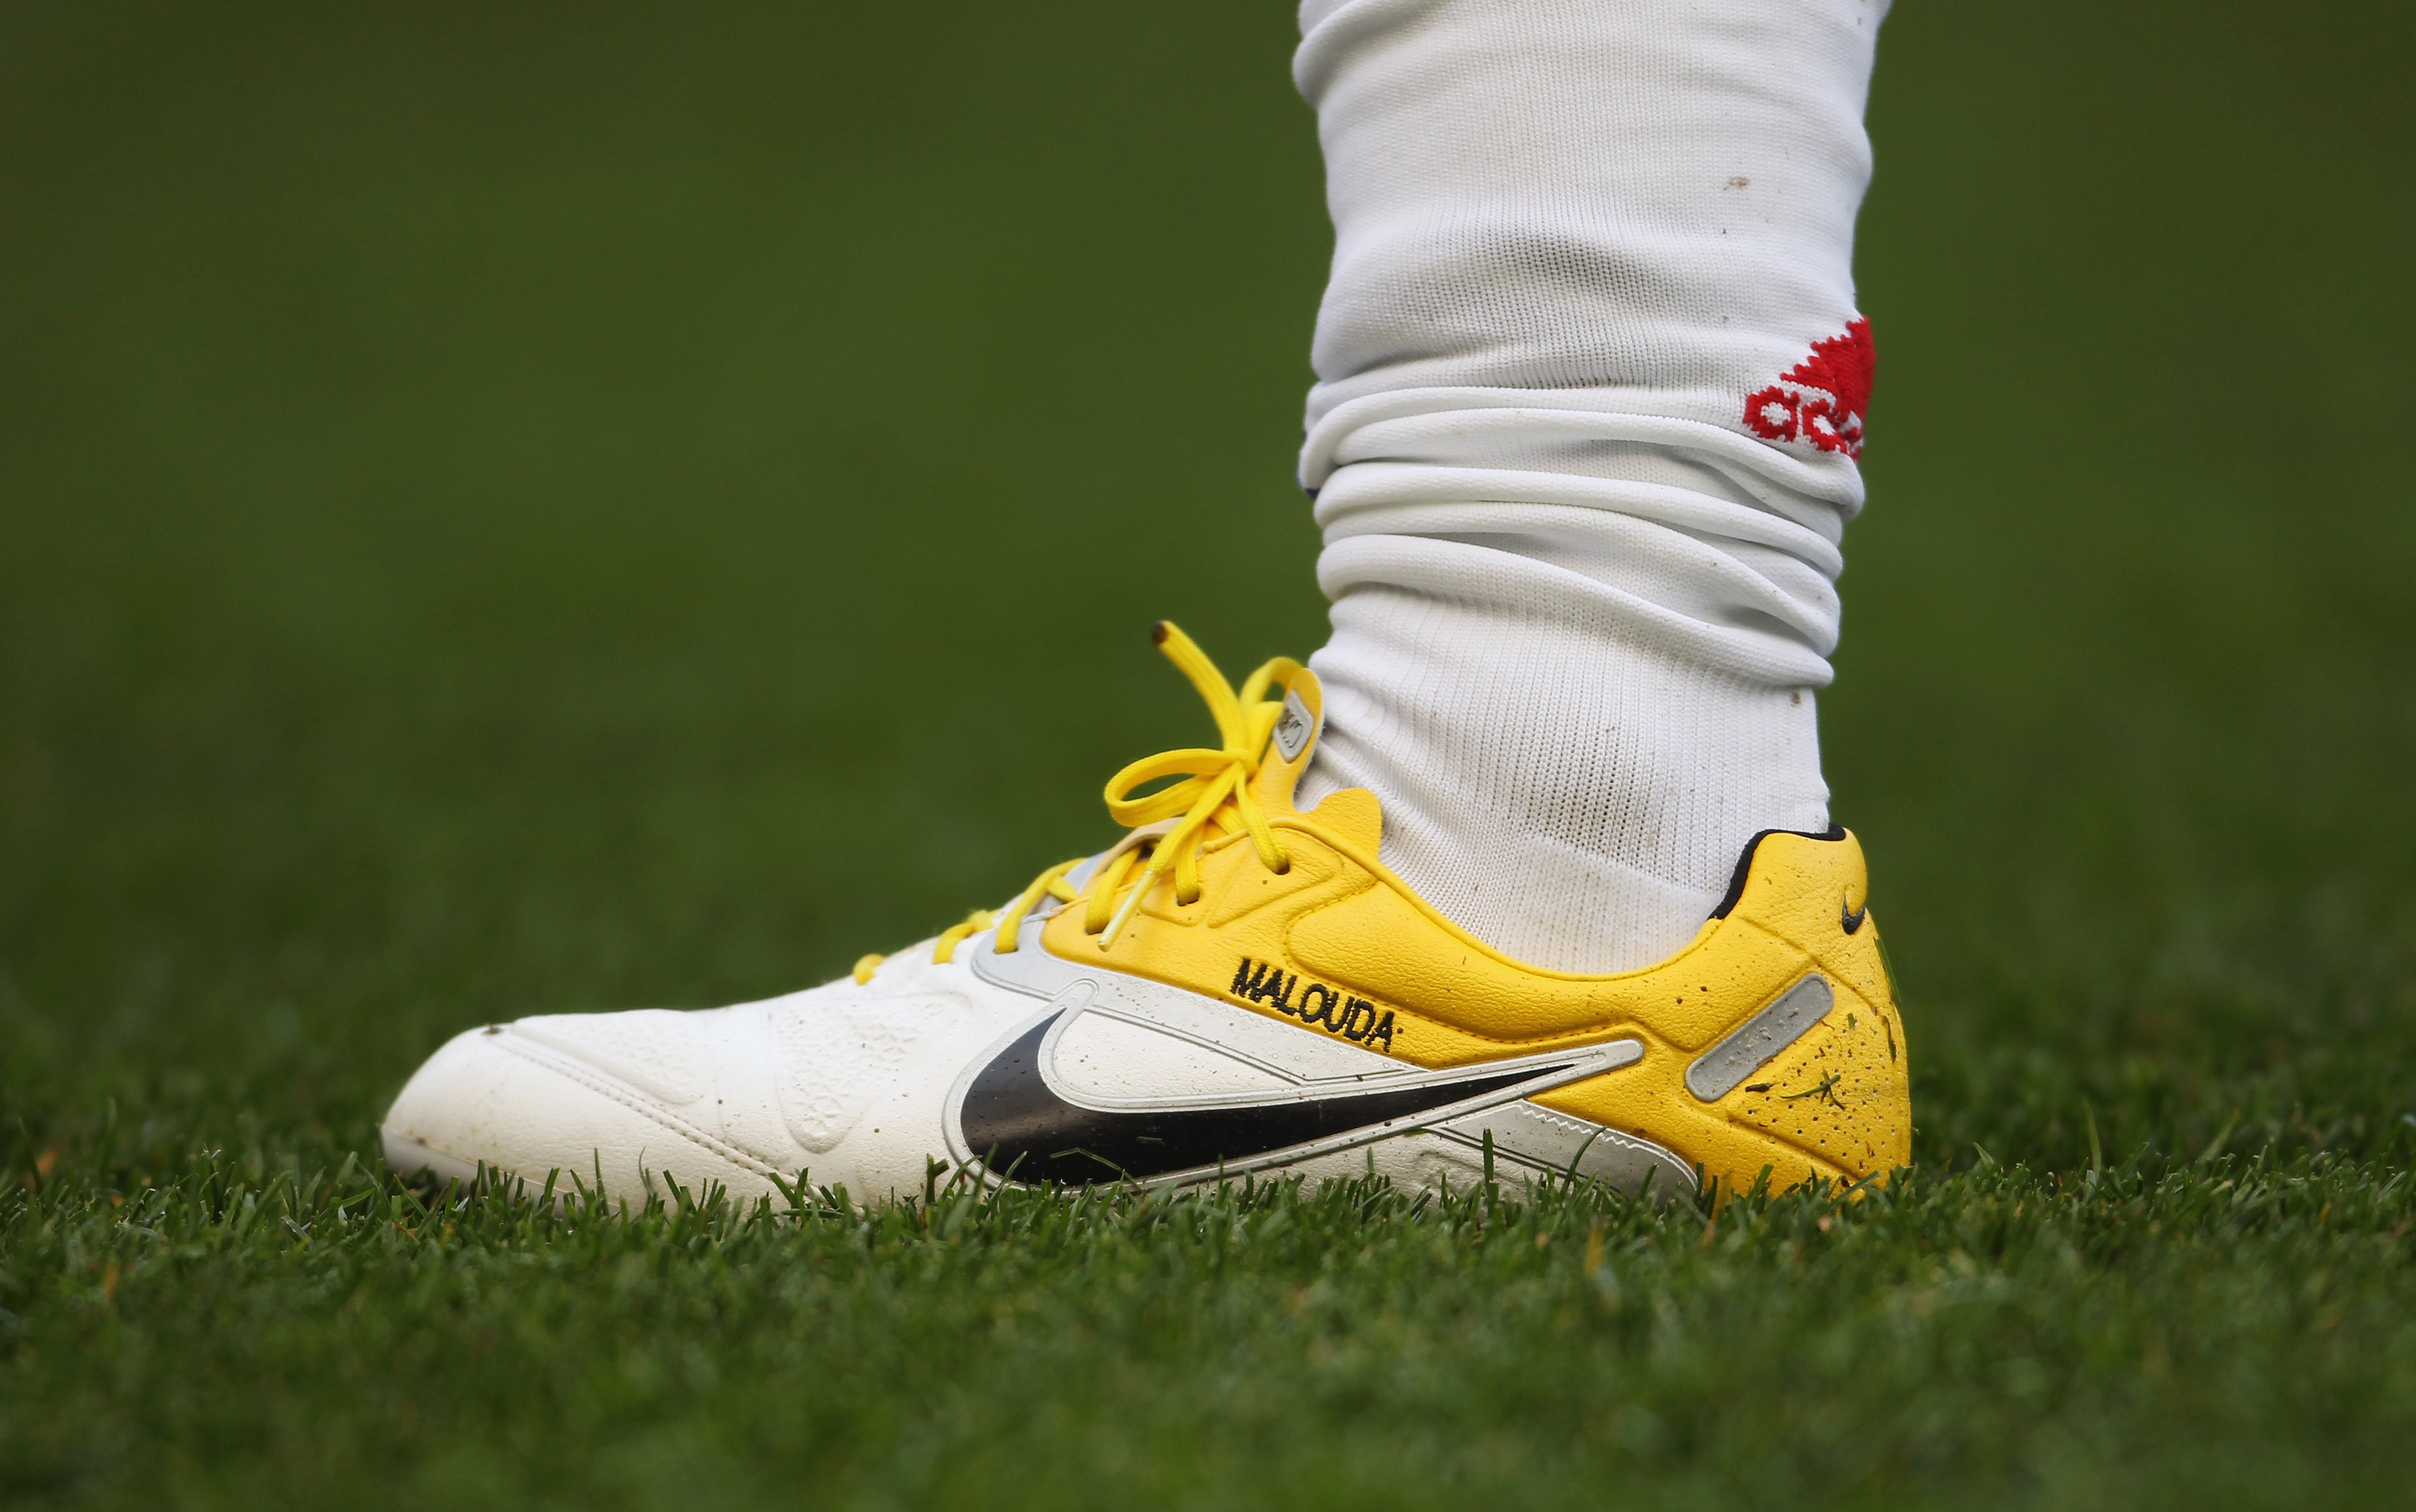 LONDON, ENGLAND - MARCH 20:  A detailed view of the boots of Florent Malouda of Chelsea prior to the Barclays Premier League match between Chelsea and Manchester City at Stamford Bridge on March 20, 2011 in London, England.  (Photo by Scott Heavey/Getty I